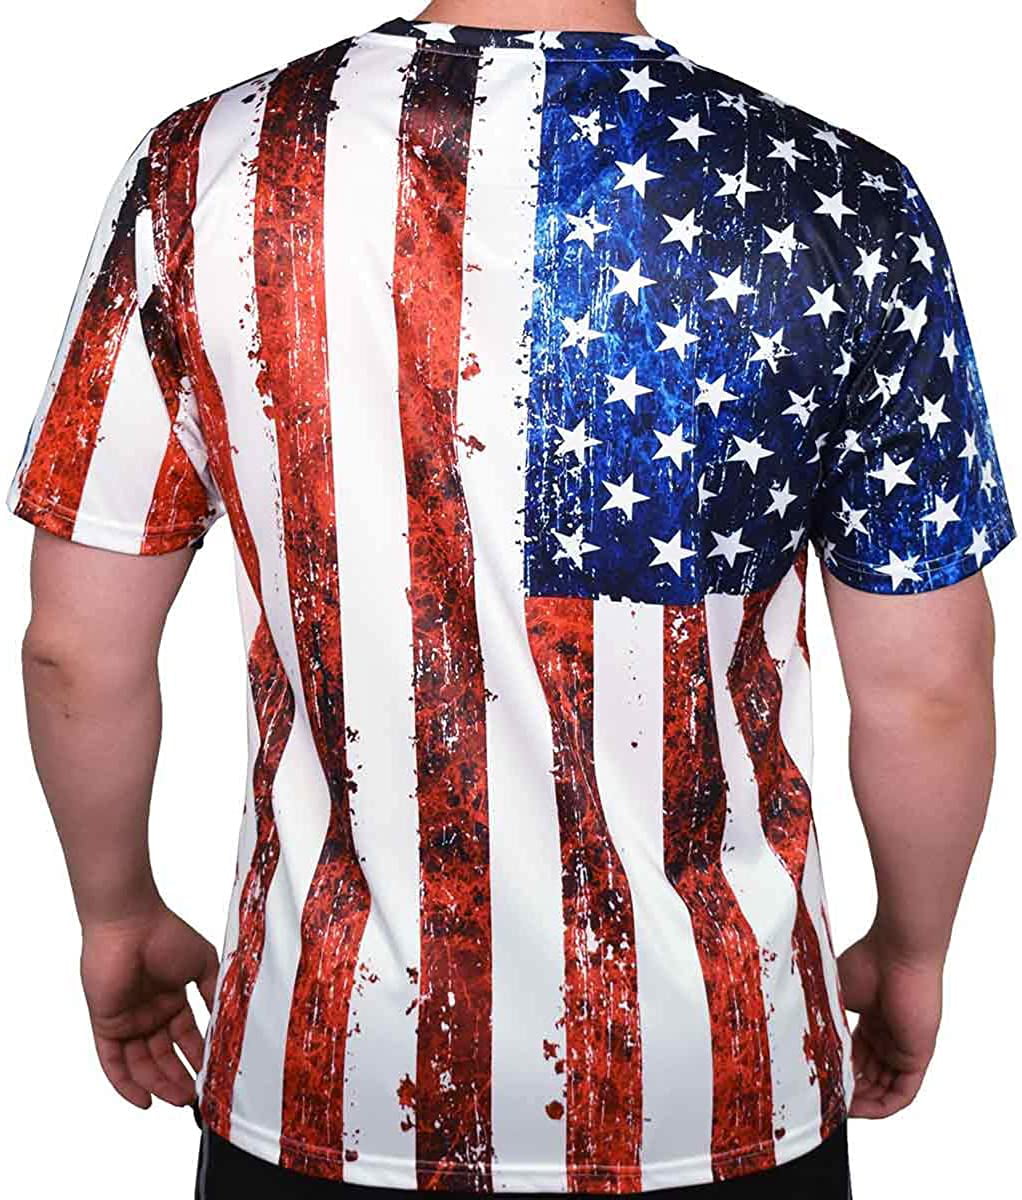 Men's Crew neck Sublimation American Flag Print T-Shirt Available in 5 Sizes